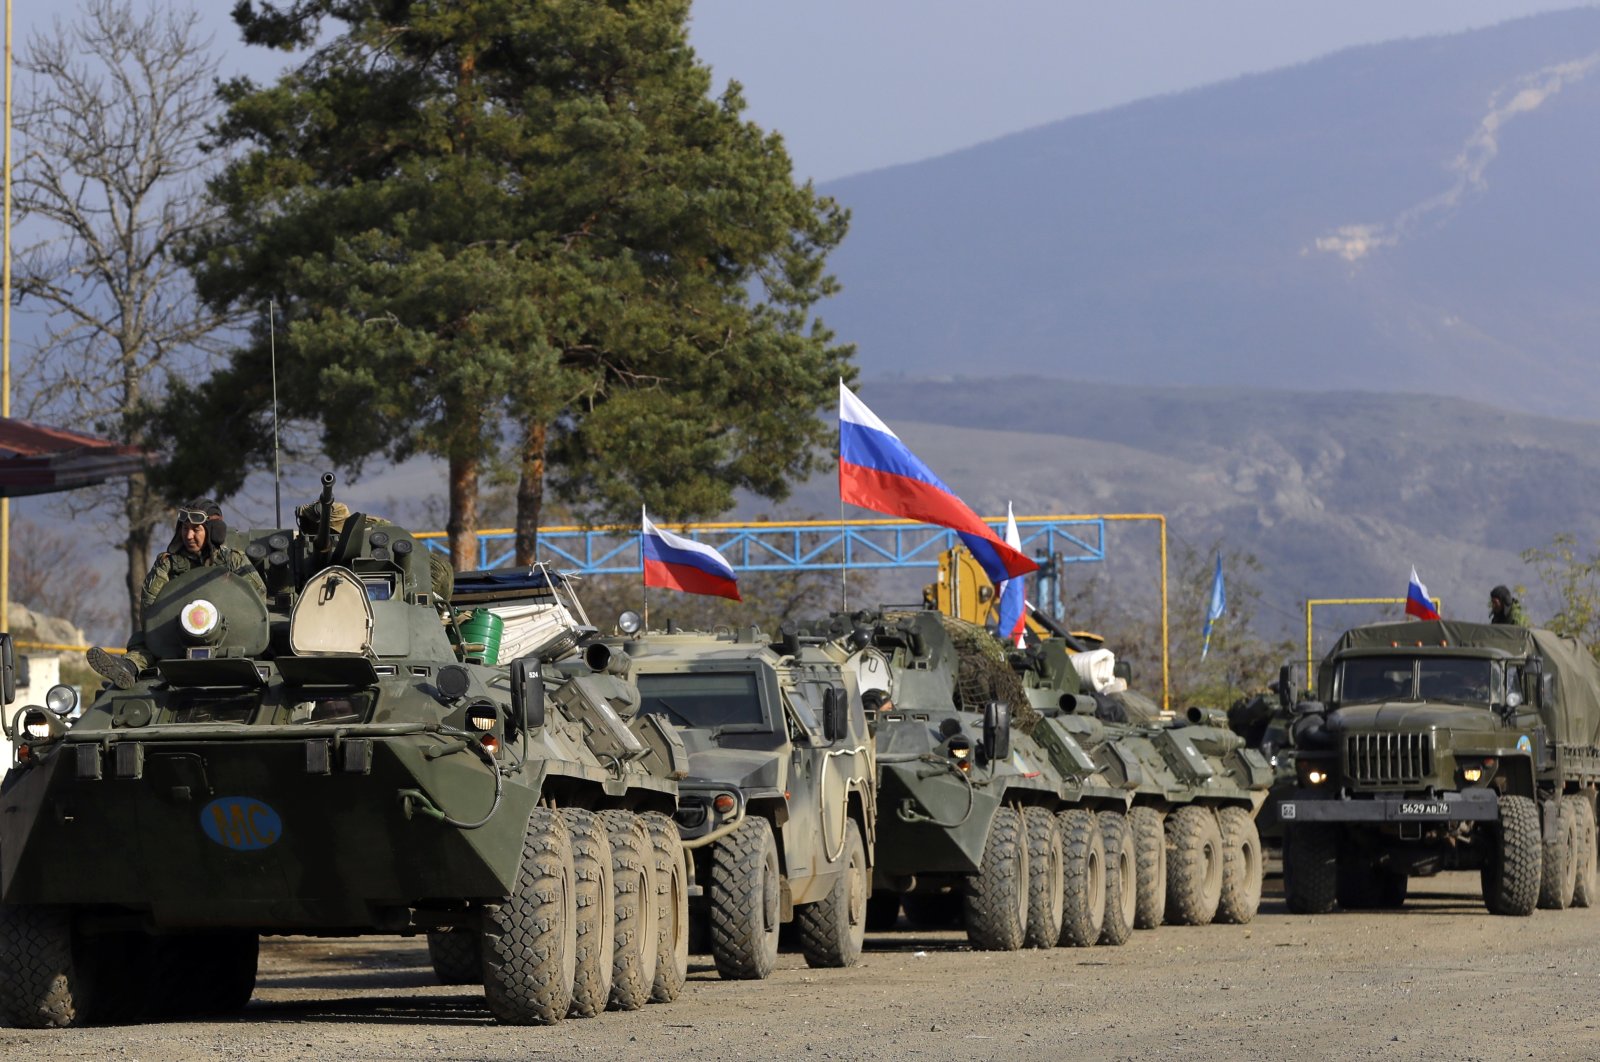 Russian peacekeepers' military vehicles with Russian national flags parked at a checkpoint on the road to Shusha in the region of Nagorno-Karabakh, Nov. 17, 2020. (AP Photo)